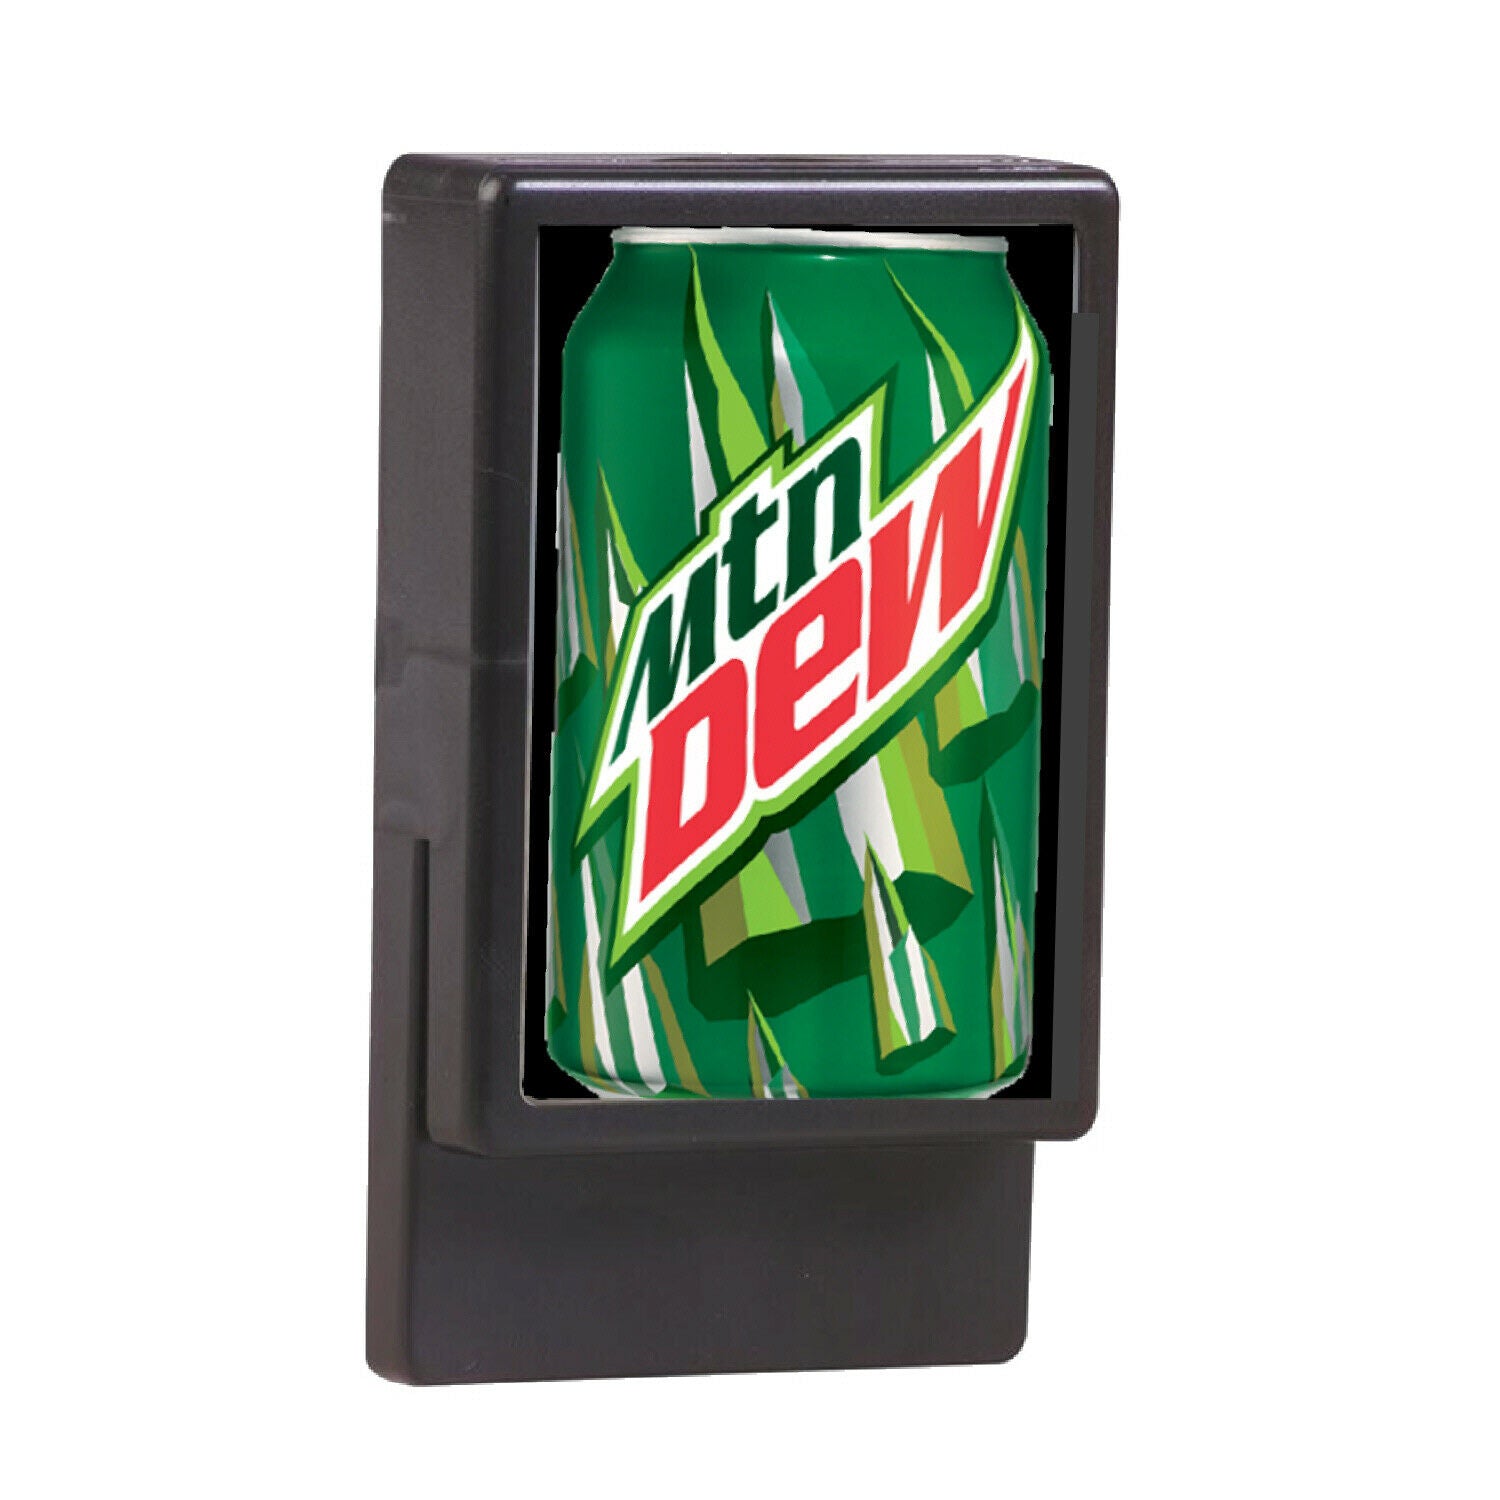 Mountain Mt. Dew can Magnetic Display Clip Big 4 inches